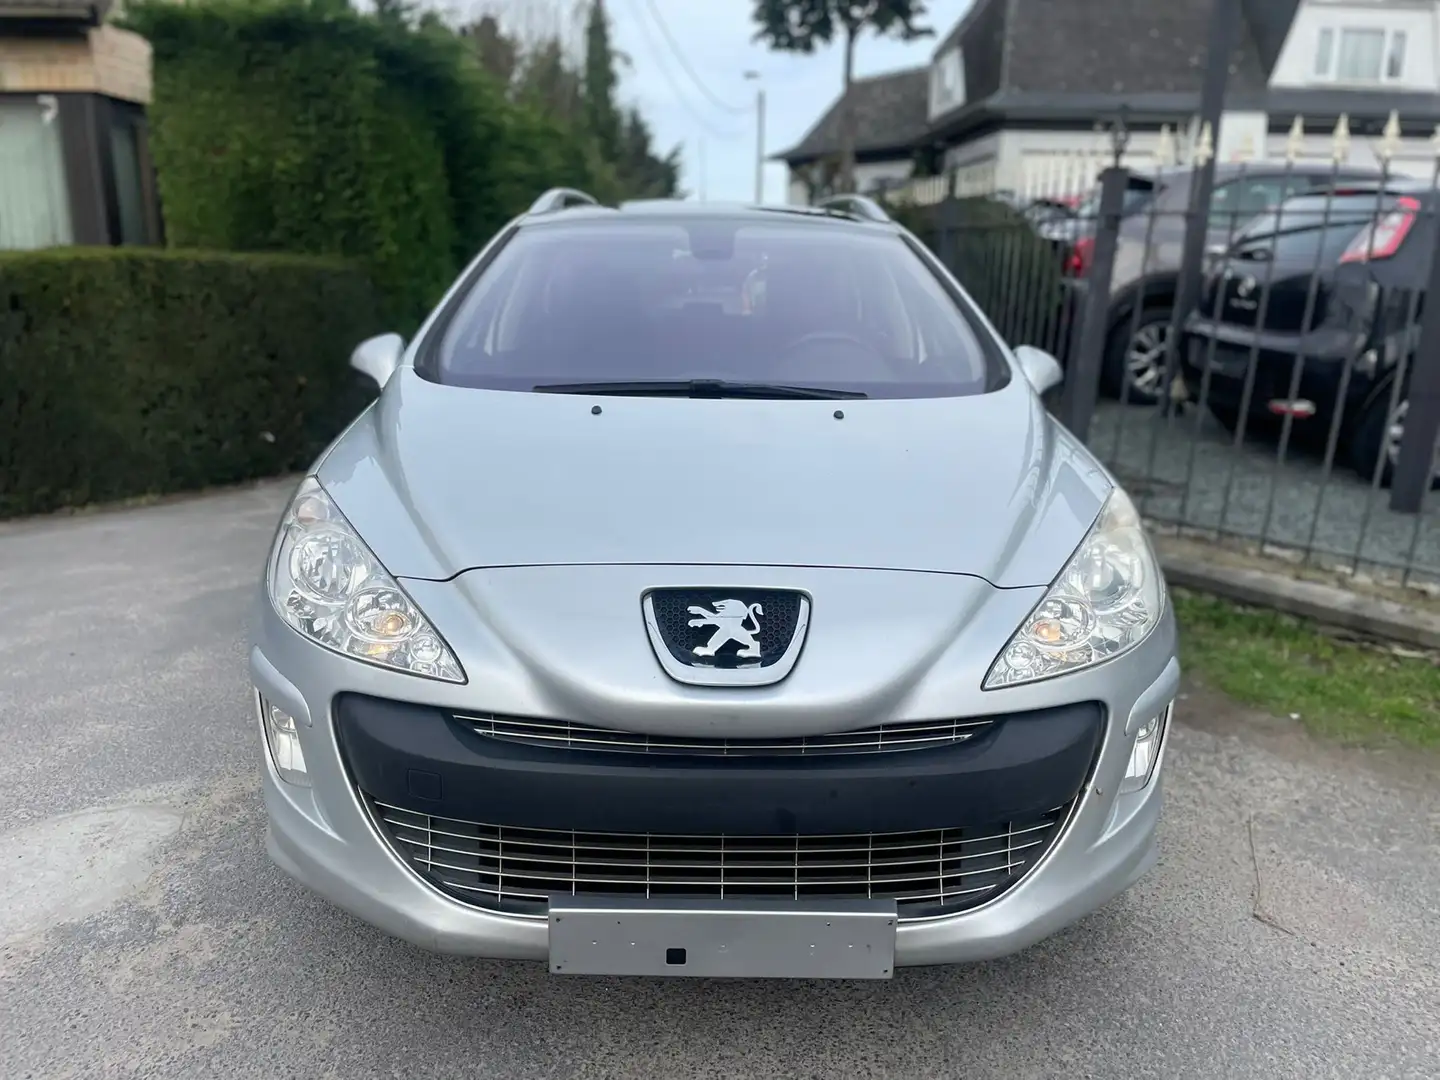 Peugeot 308 1.6 HDi - Toit Pano- Jantes- Airco -Cruise control Argent - 2